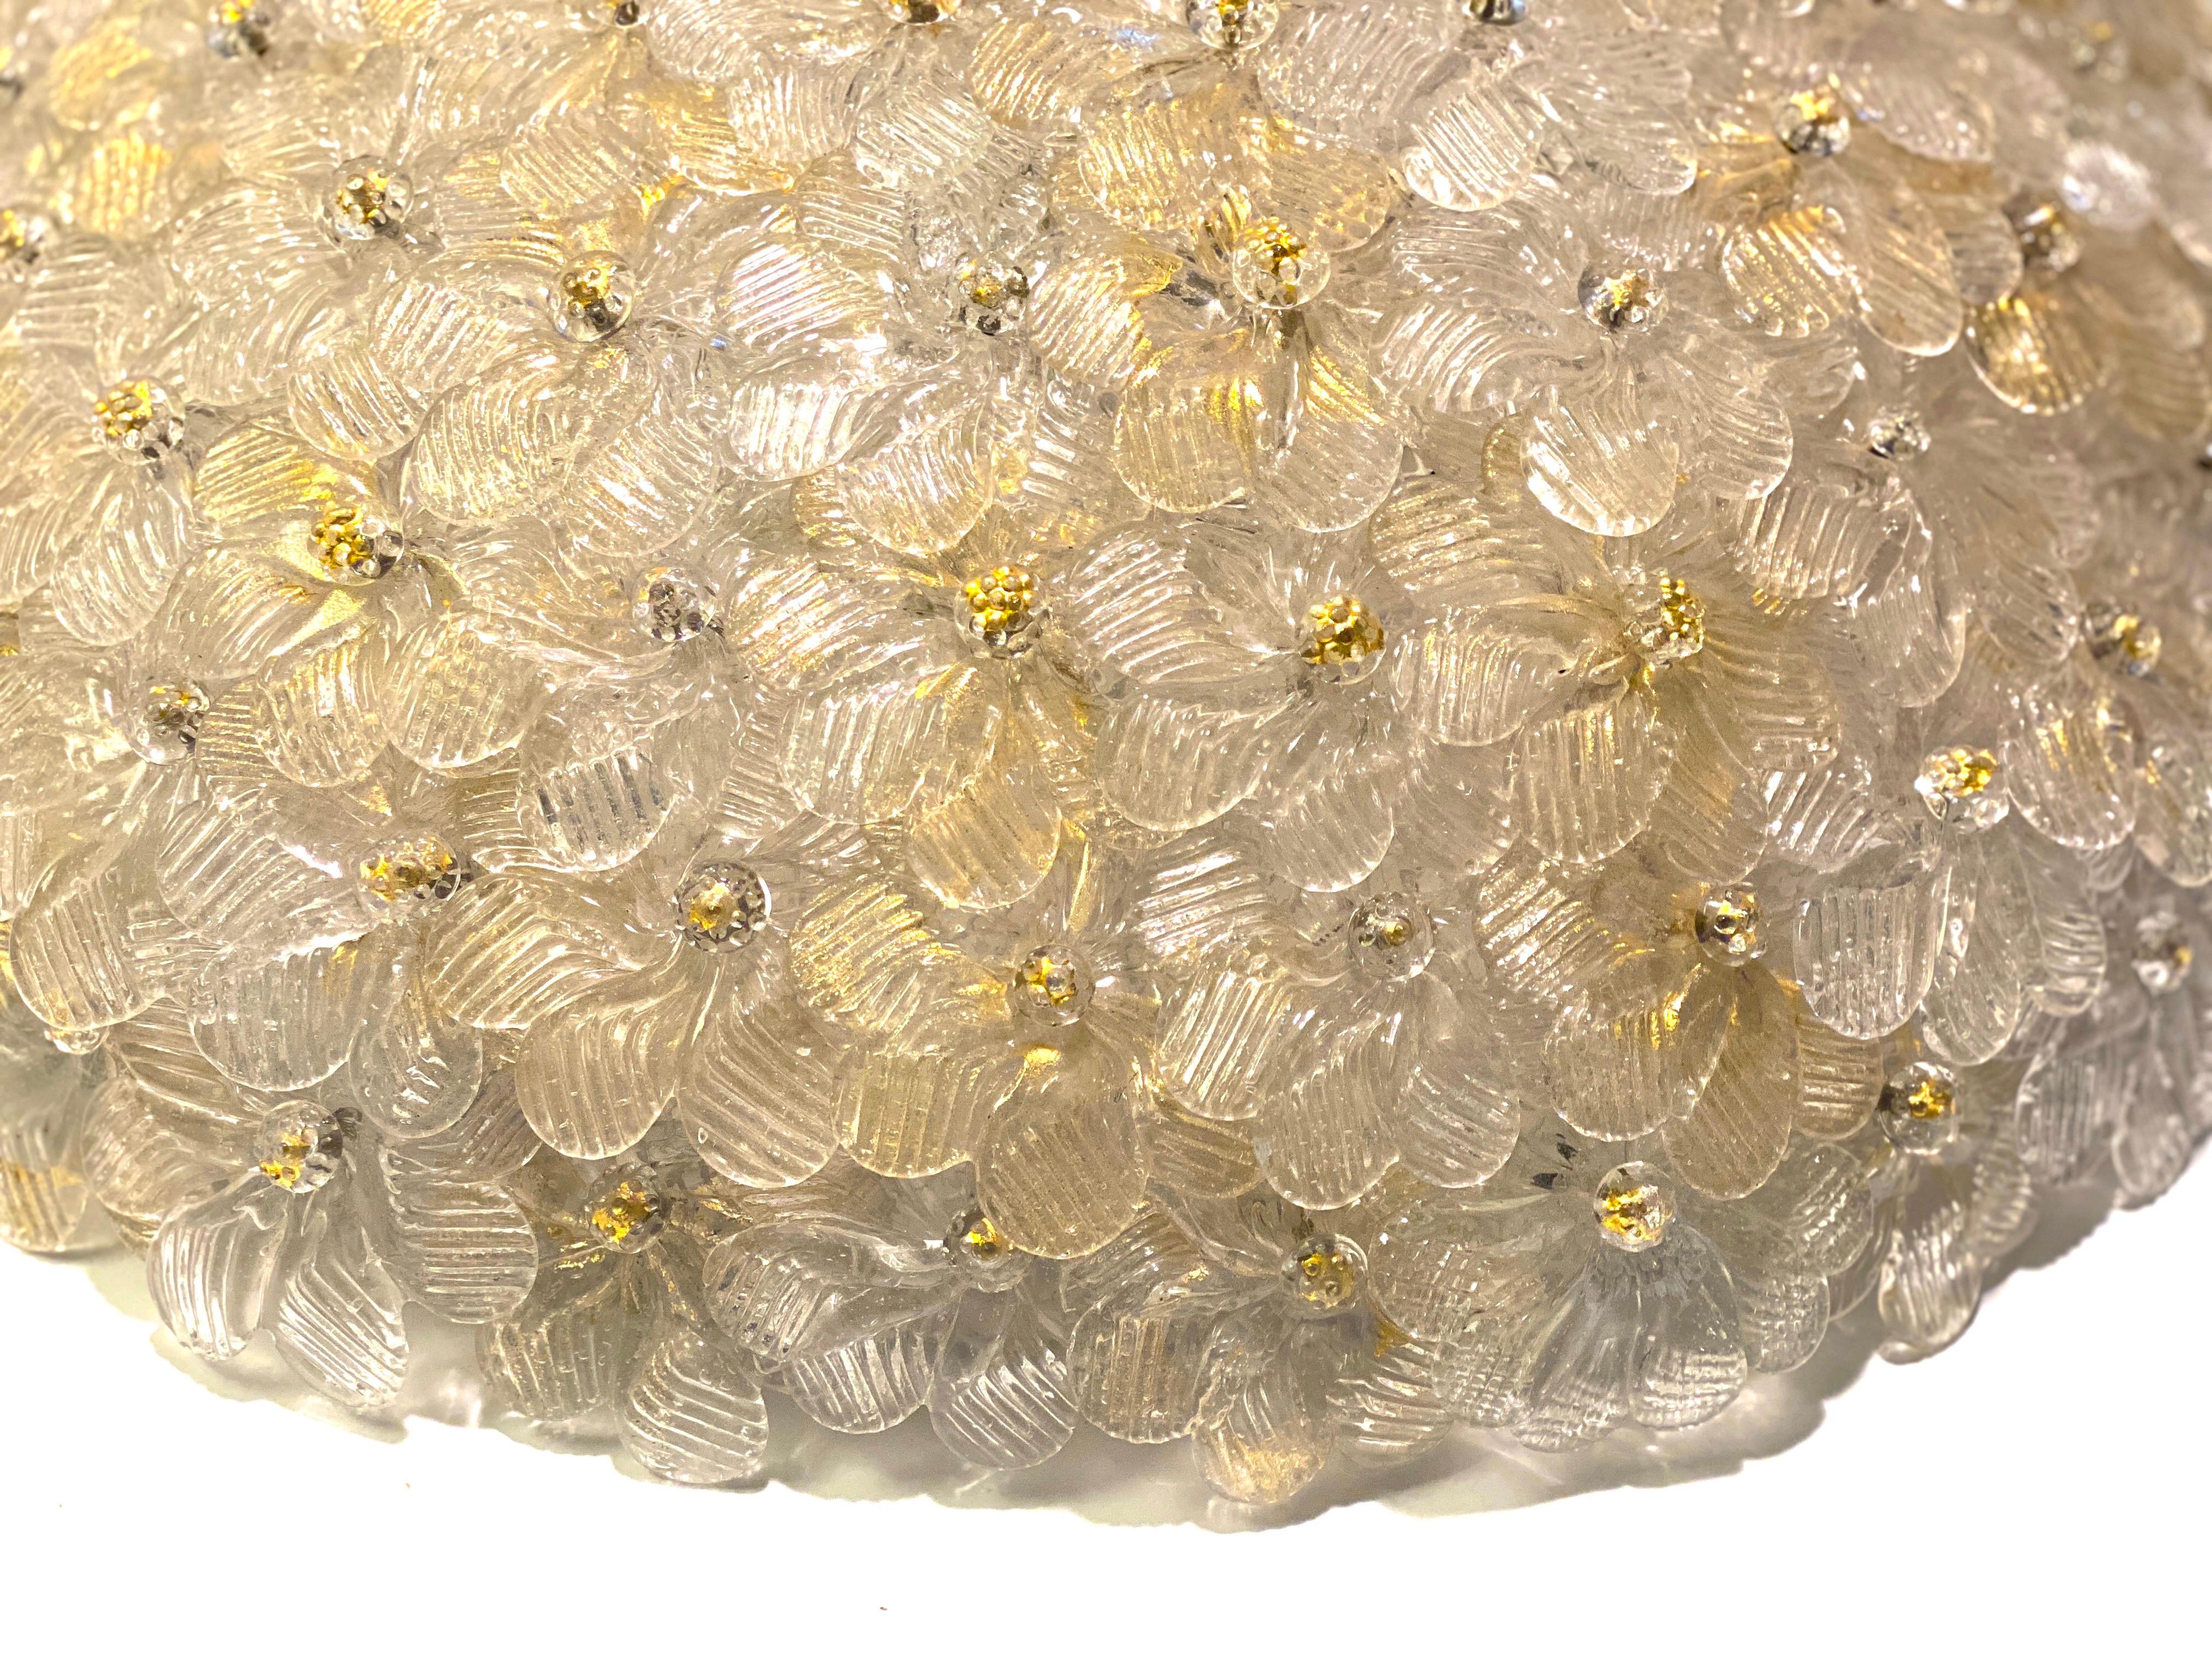 Pair of Amazing Murano Glass Ceiling Light  by Barovier & Toso, 1960 For Sale 1